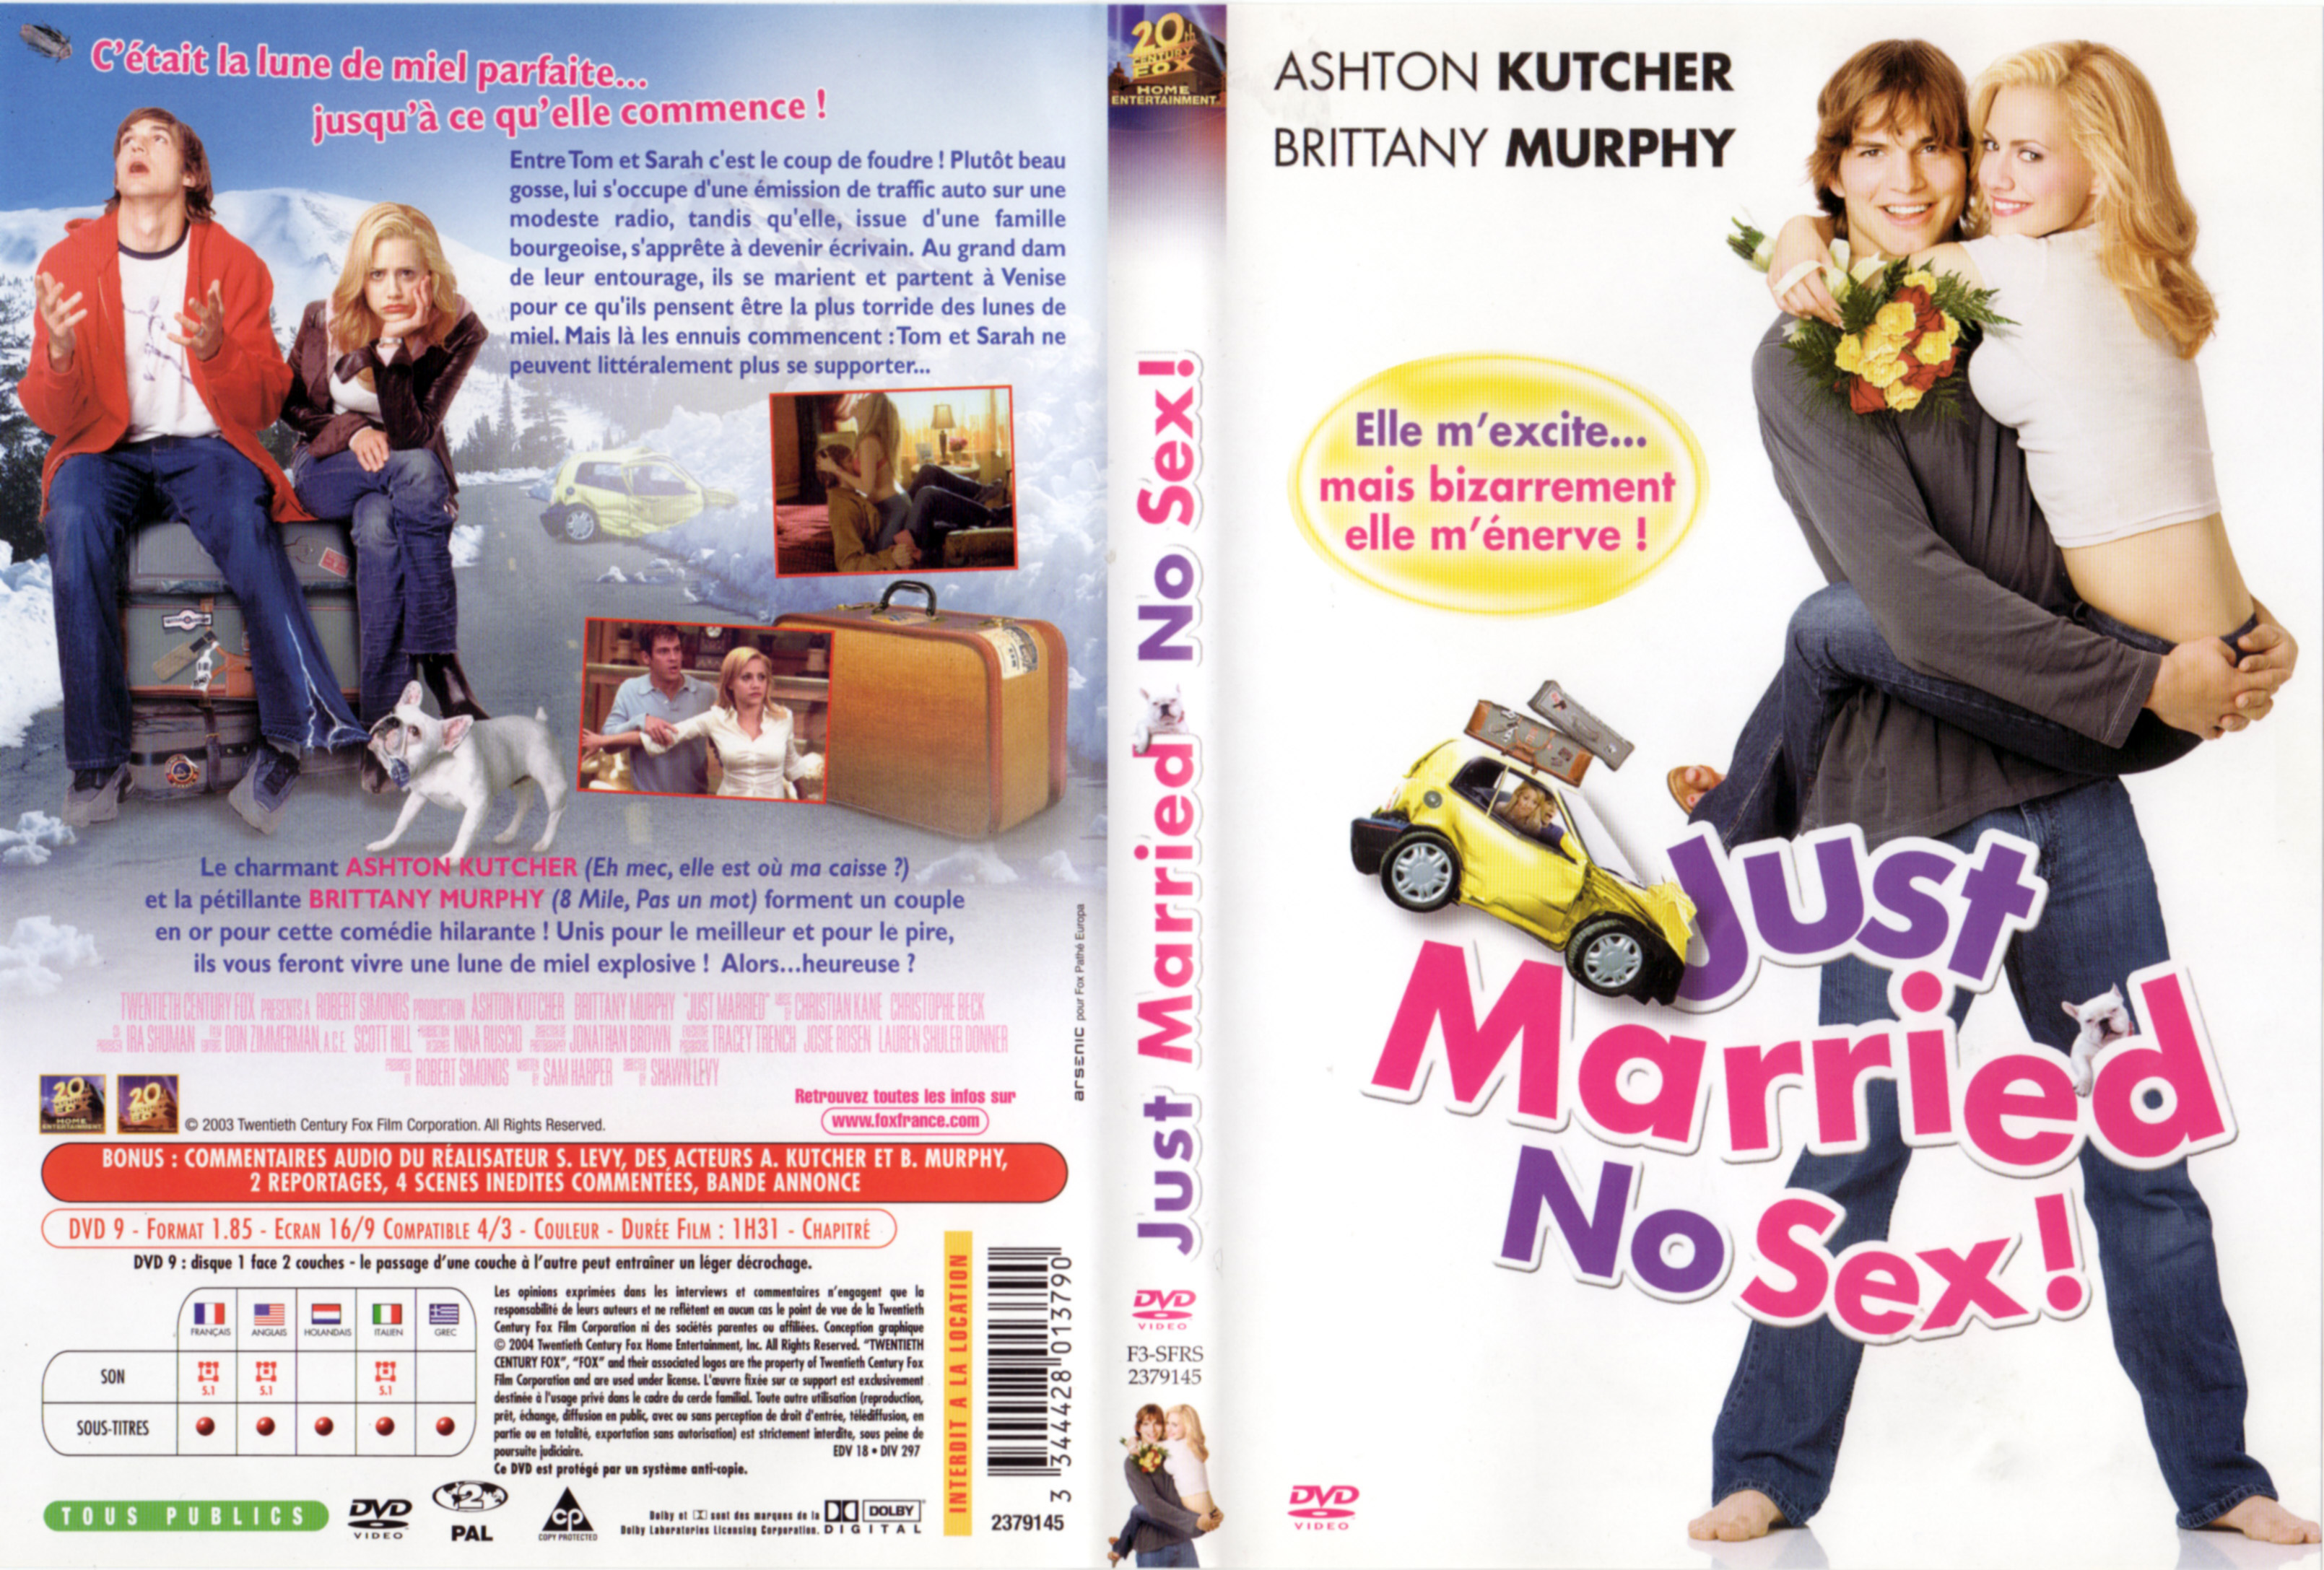 Jaquette DVD Just married no sex